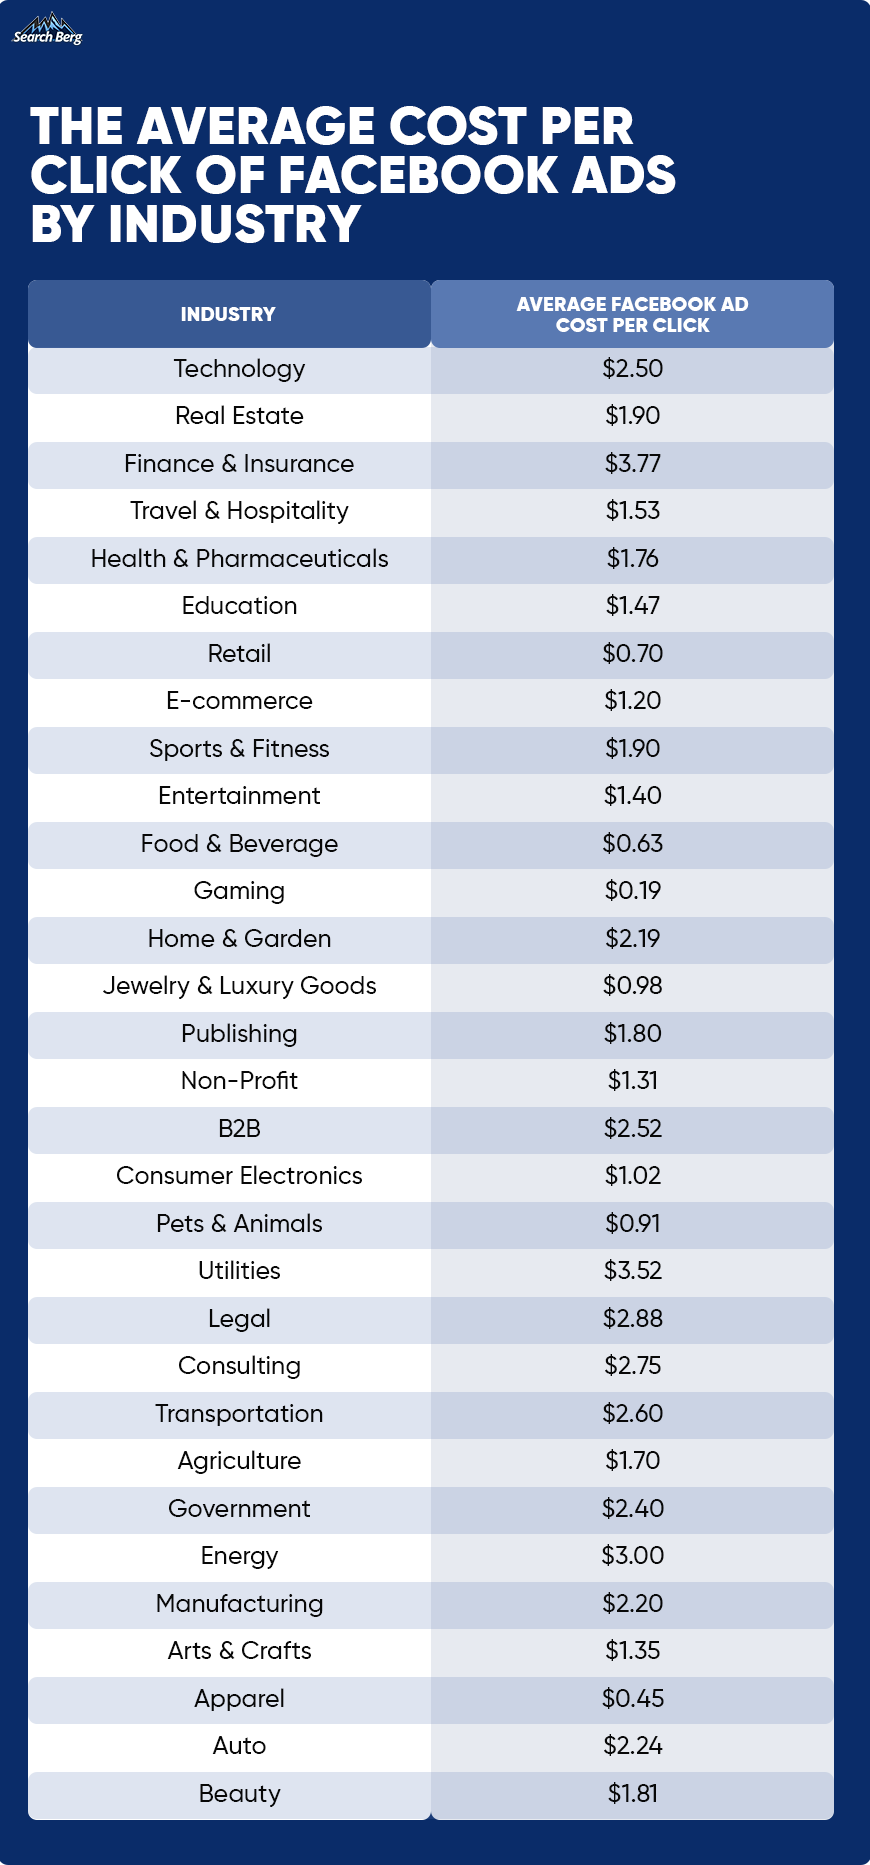 the average cost per click of Facebook ads per industry